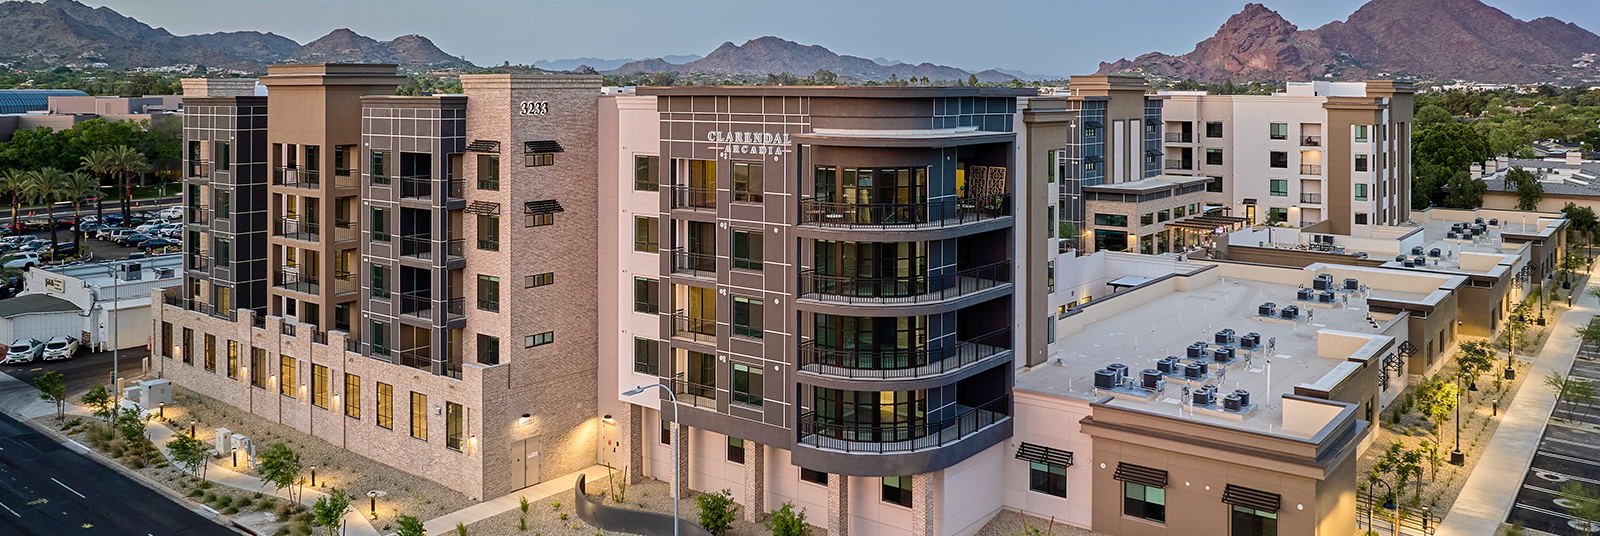 Photo of Clarendale Arcadia senior living community exterior facade with mountains in the background